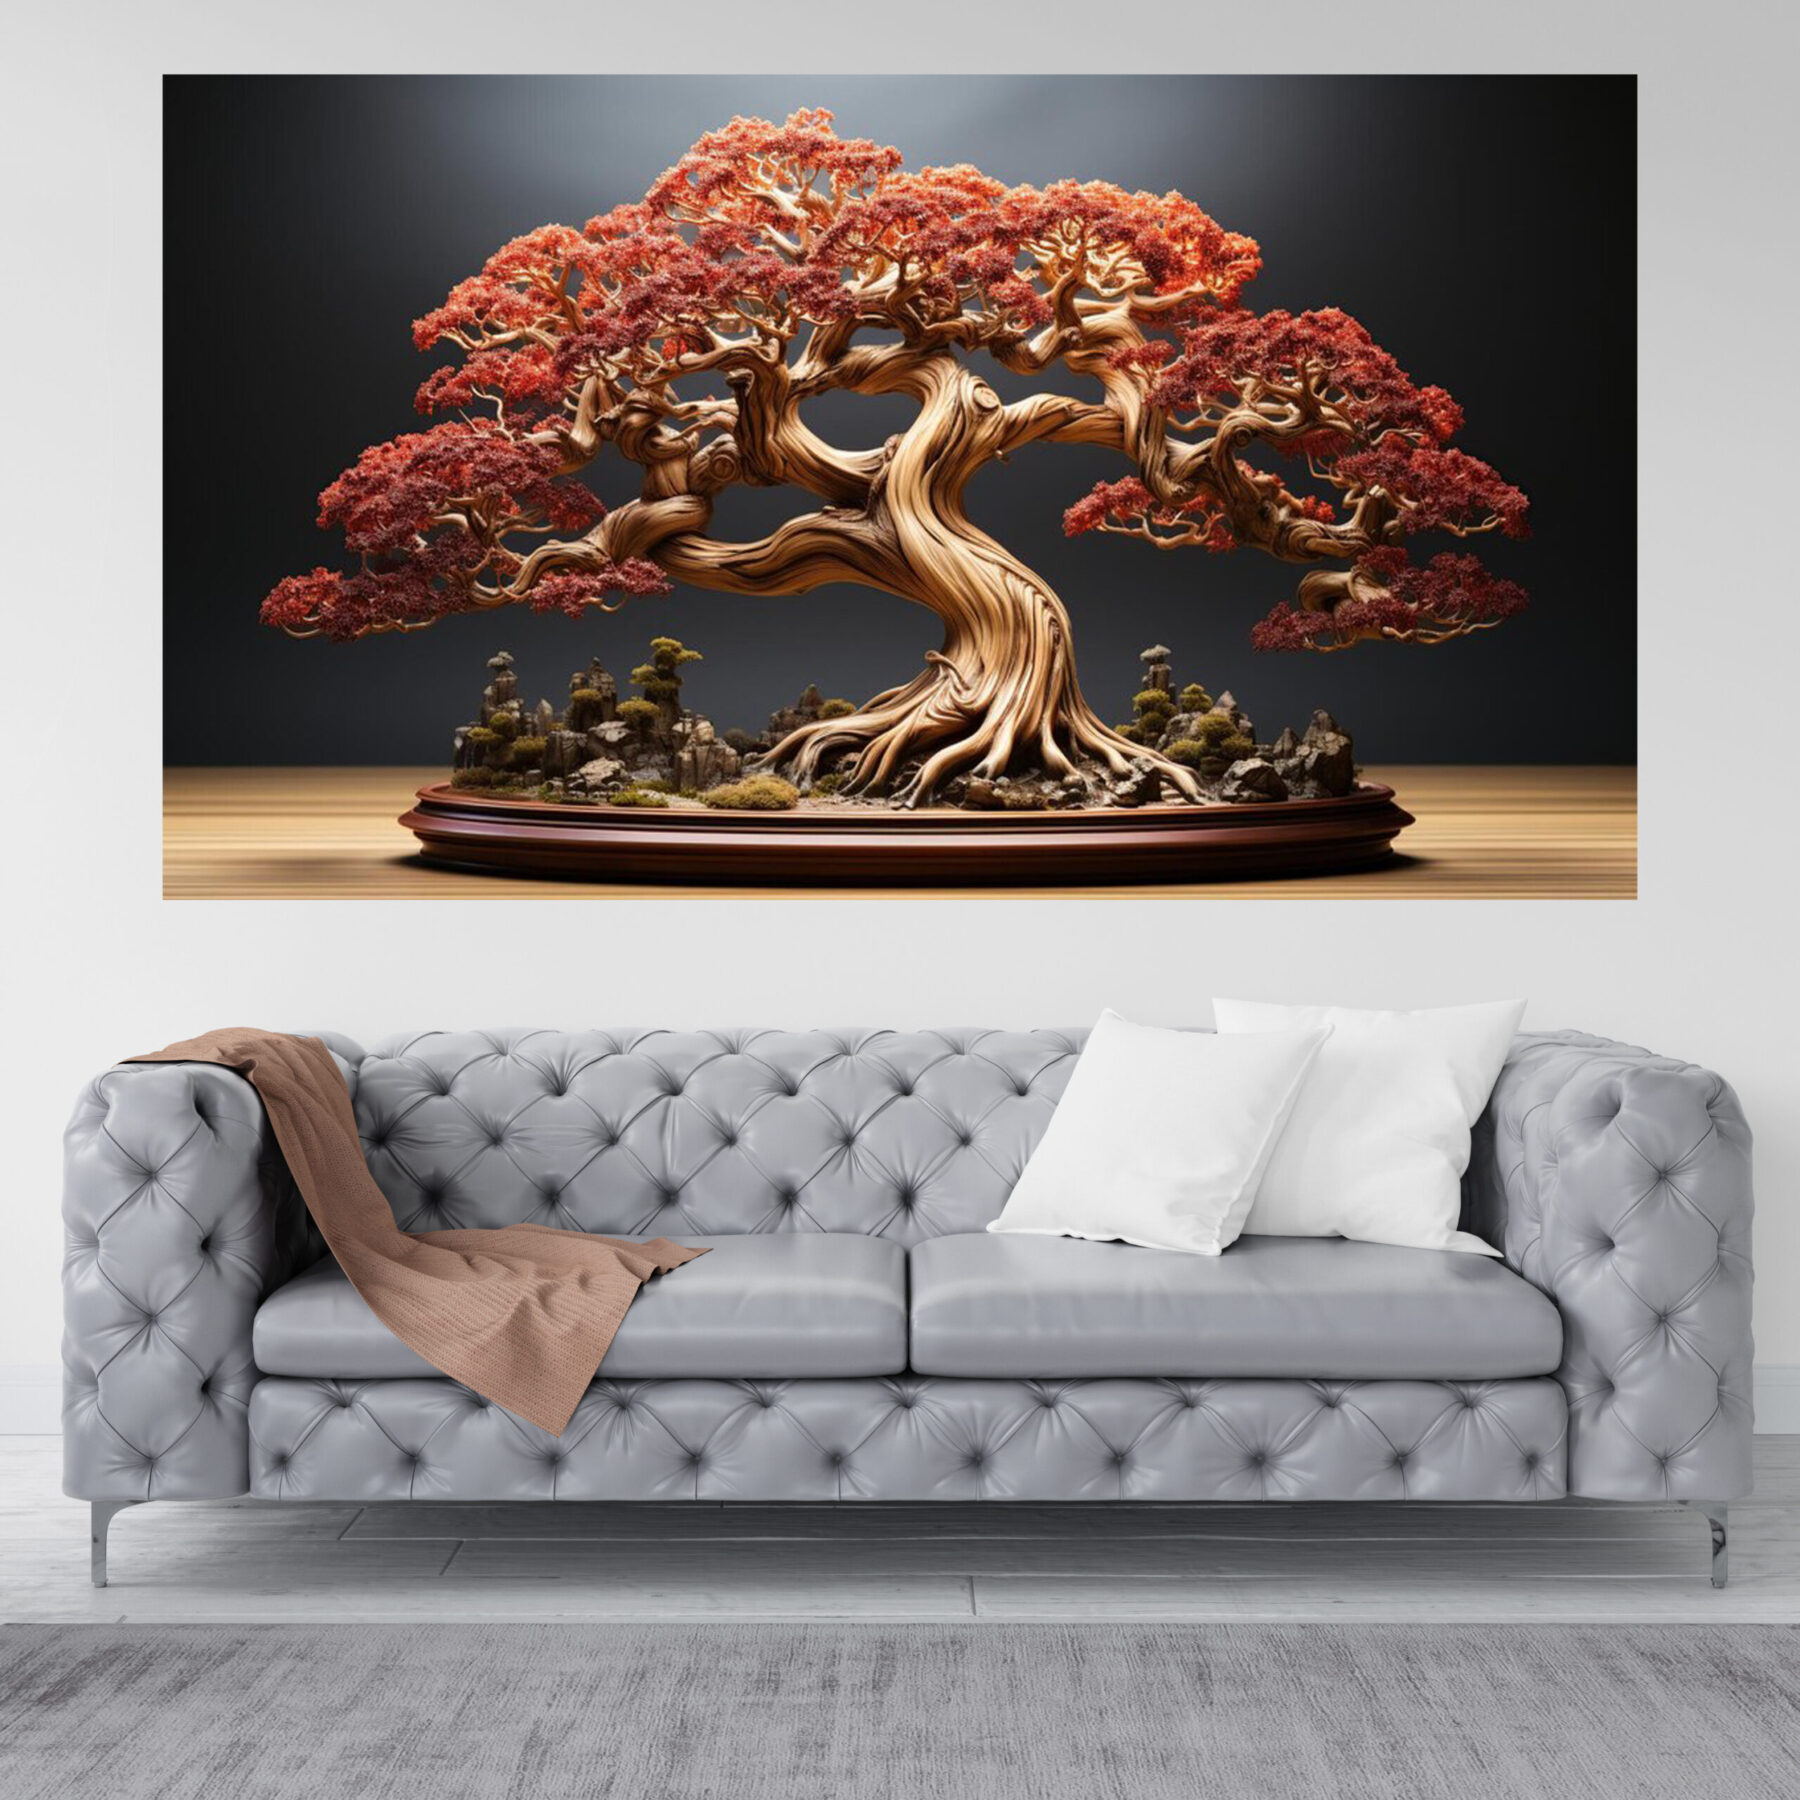 Tree paintings canvas wall art large size for living room decor. Large painting for wall. (36 Inch x 24Inch, )